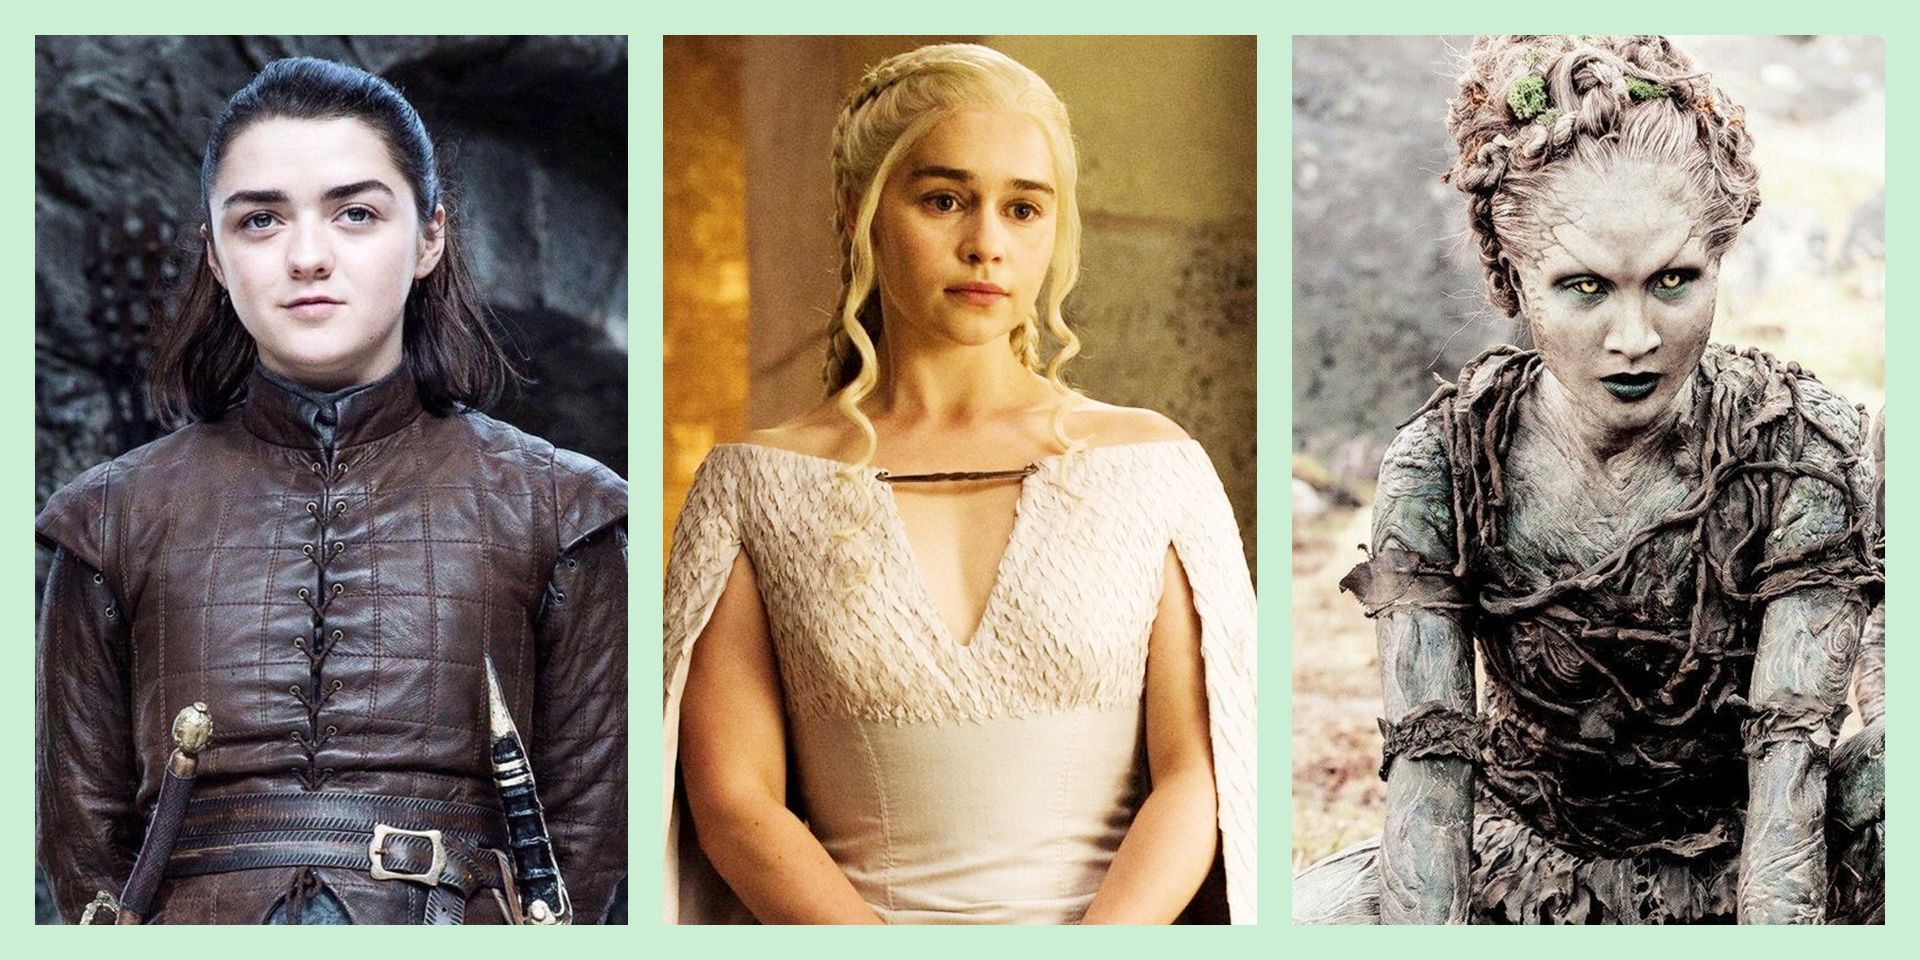 <p>Winter is coming  – or should I say Halloween? HBO's <em>Game of Thrones</em> has come to an end, but your opportunity to represent all your most beloved characters is only weeks away. </p><p>Throughout eight full seasons, the show served viewers with heartbreaking deaths, emotional romances, and countless iconic outfits that would all make for pretty epic Halloween costumes. Embrace your inner Targaryen, Stark, or Lannister (and by that I mean pile on <em>lots </em>of faux fur) and prepare for a night of epic proportions. <em></em></p>